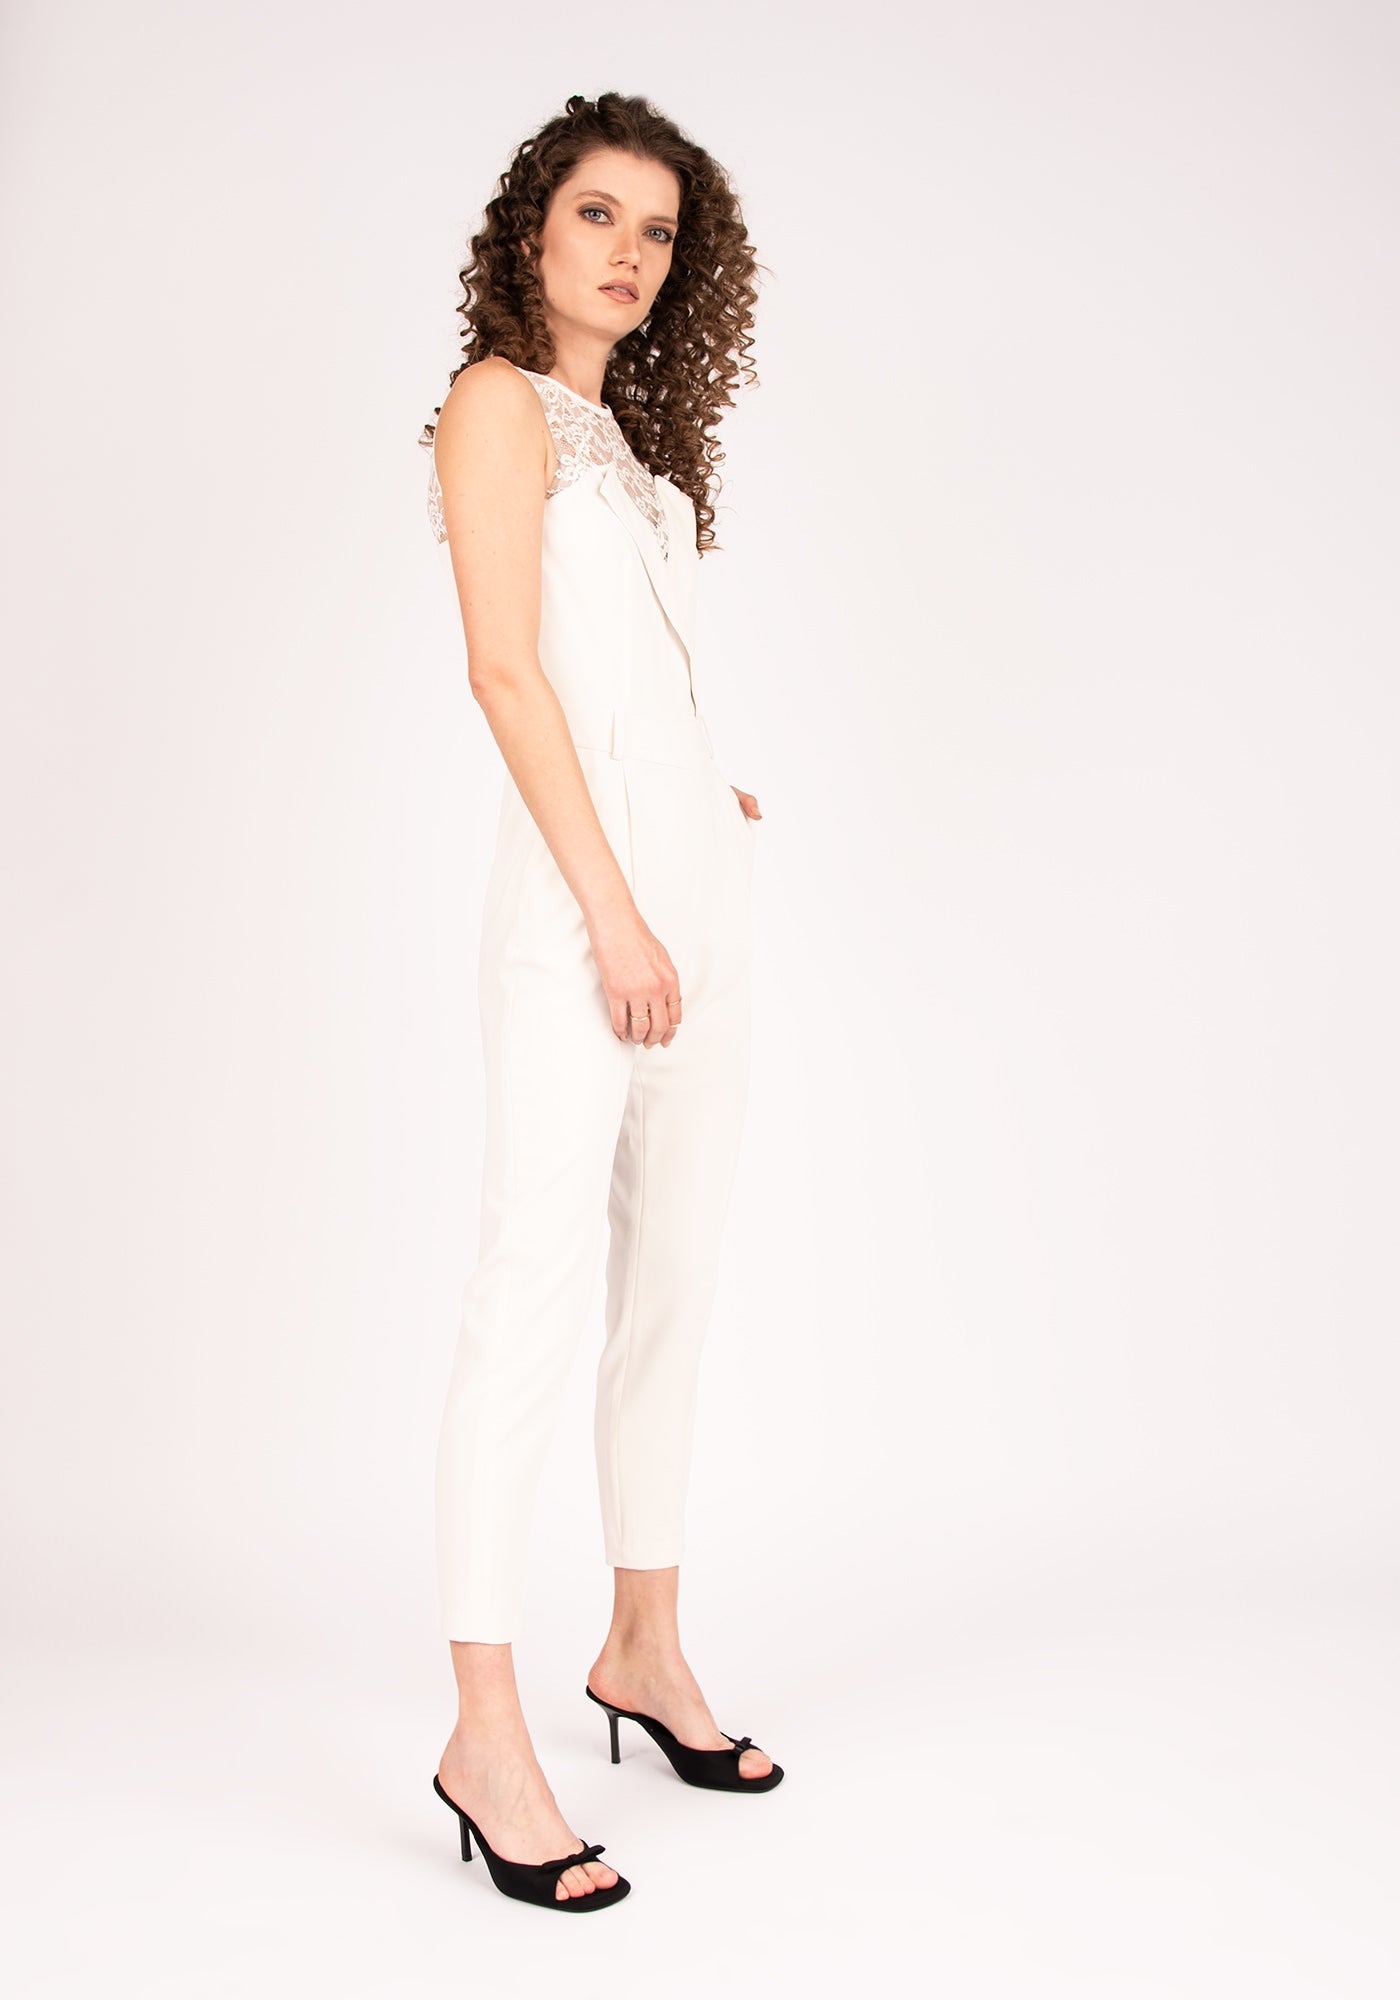 Women's Formal Jumpsuit with Lace Details in Ecru